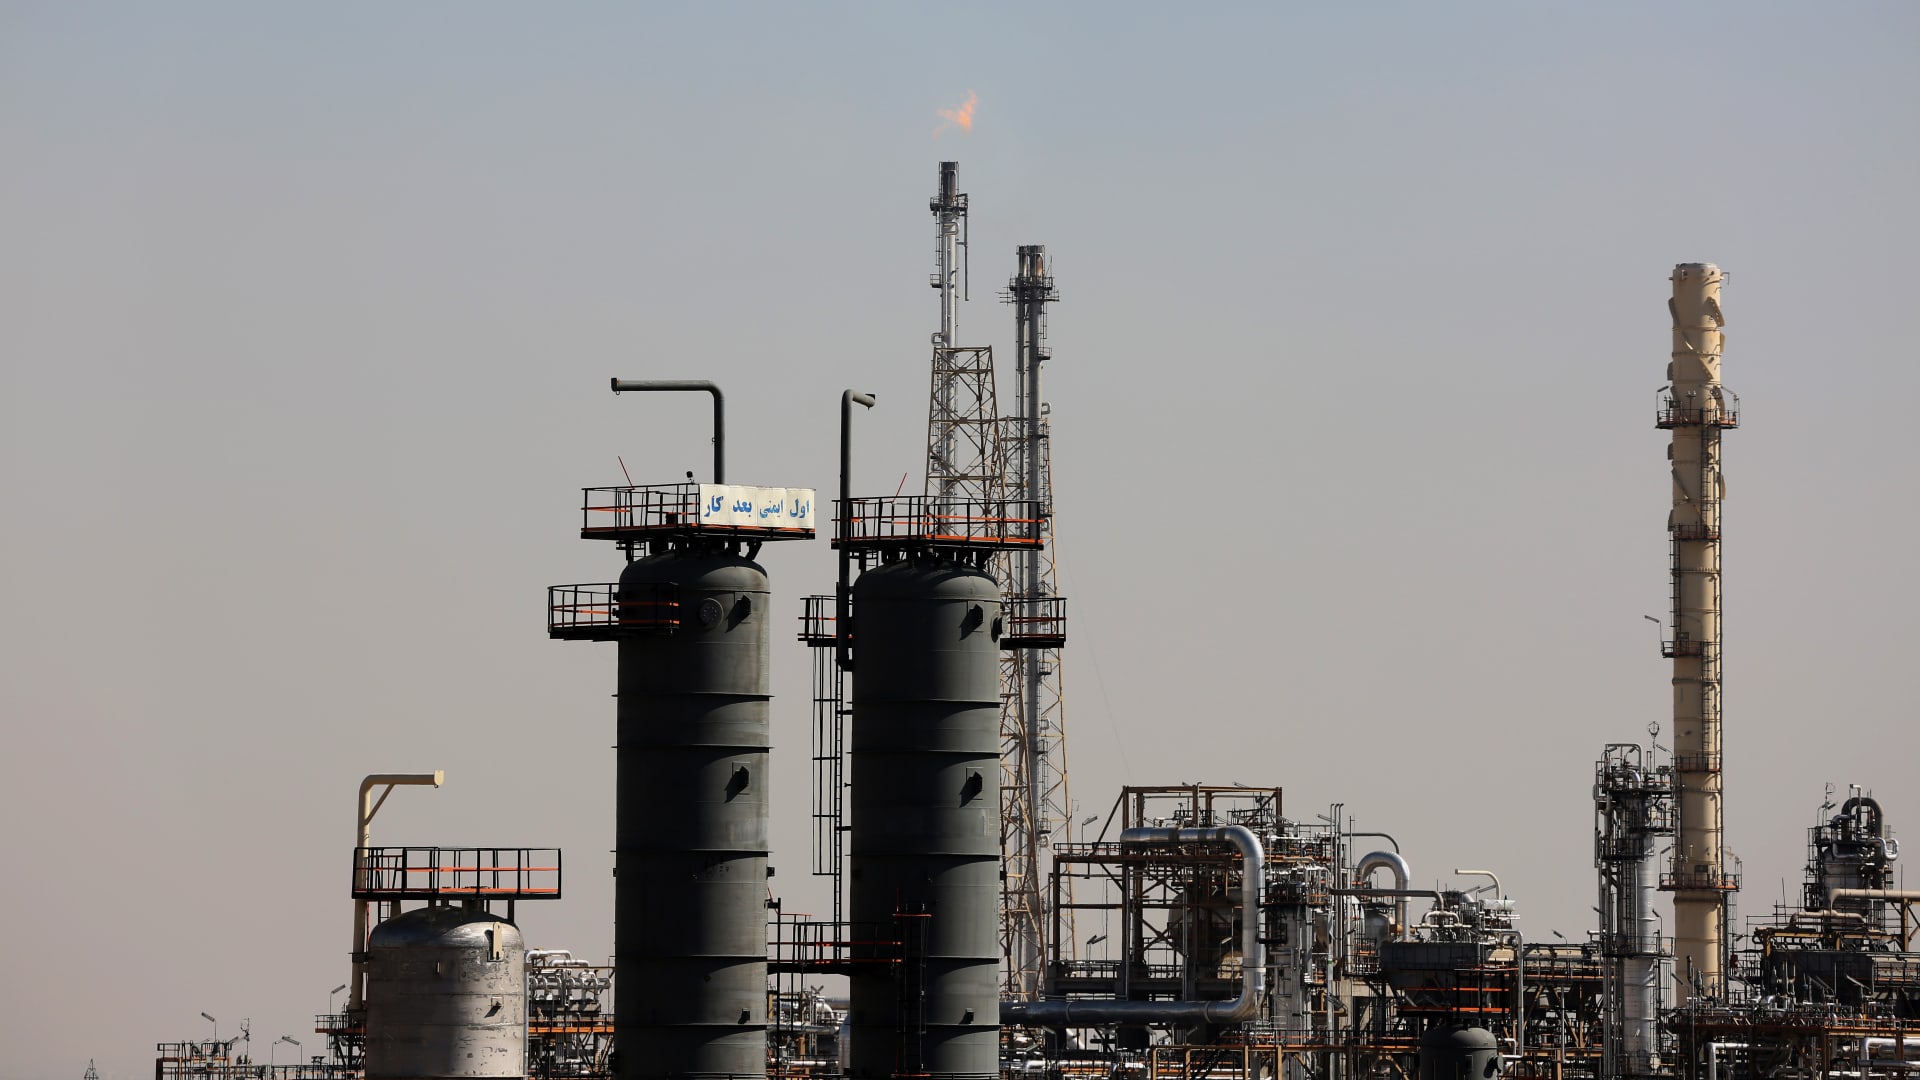 Middle East escalation could trigger energy shock that fuels inflation, World Bank warns